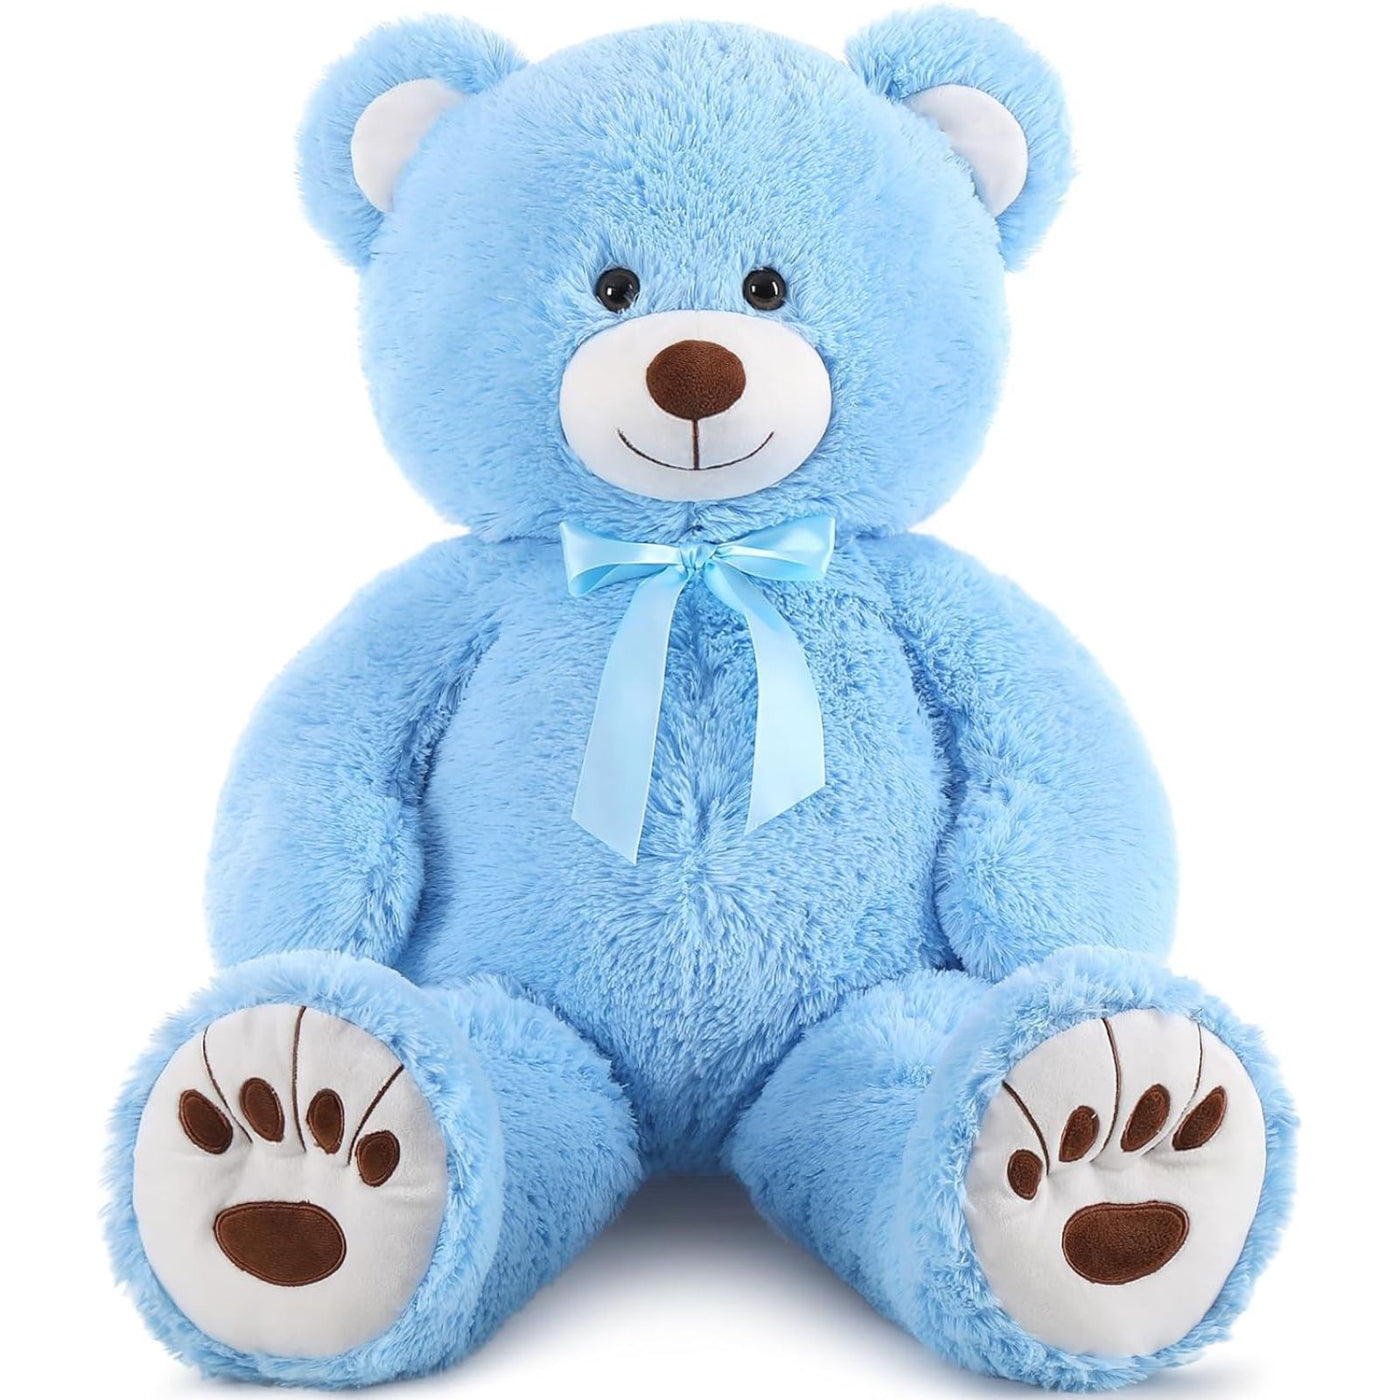 Giant Teddy Bear Plush Toy, Multicolor, 36 Inches